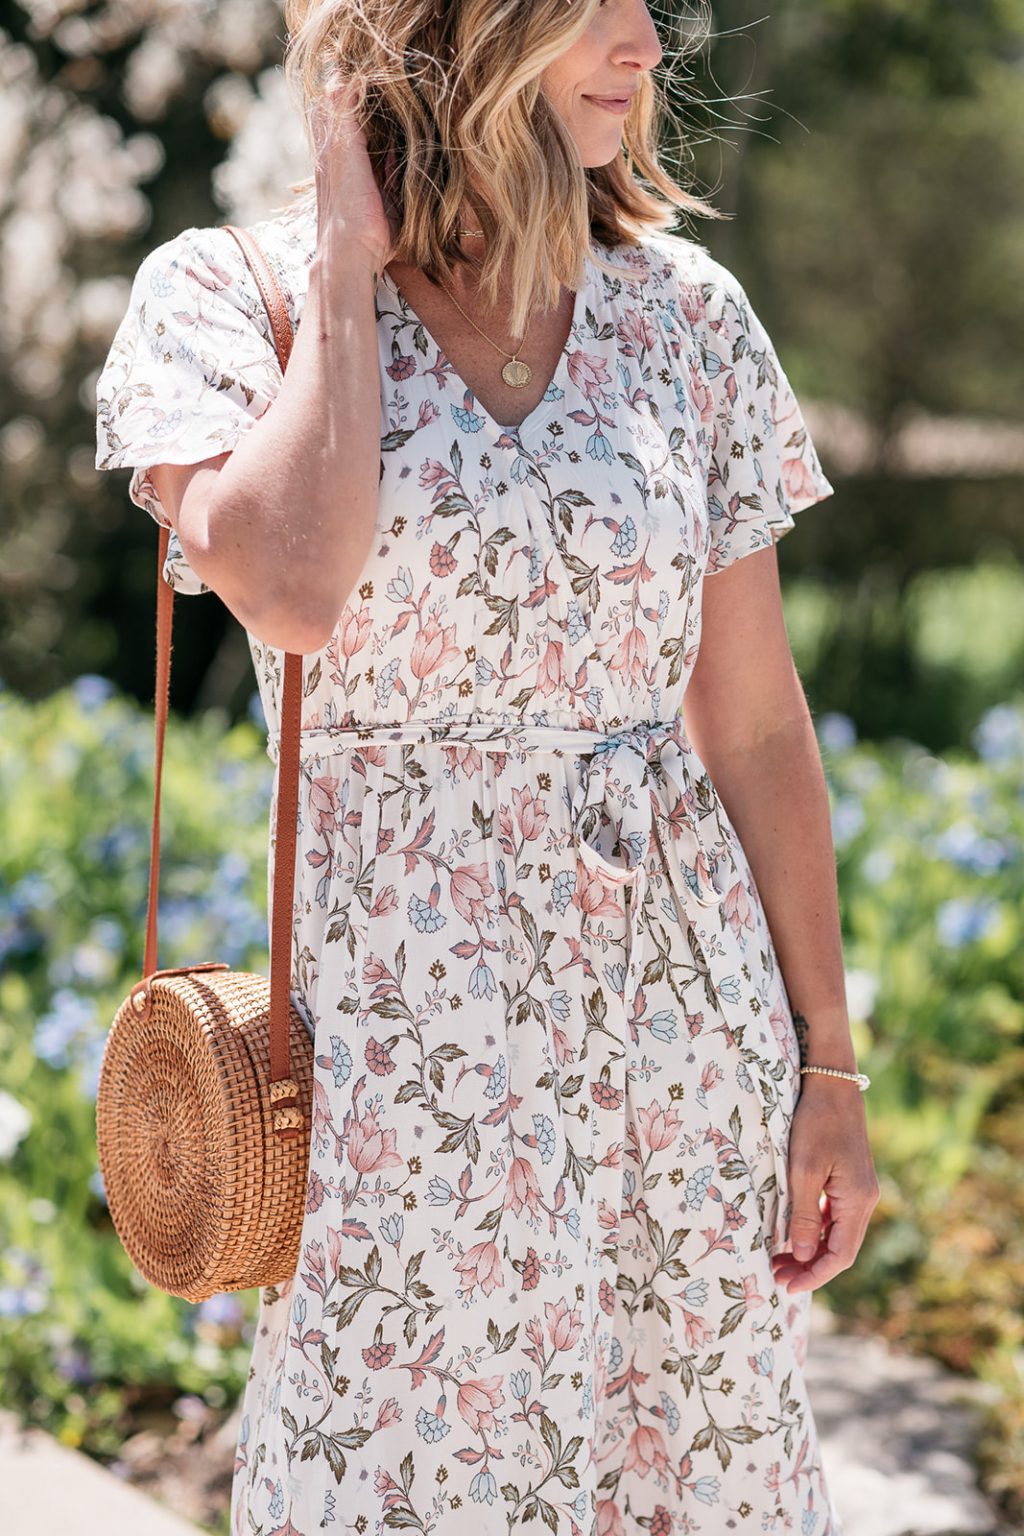 My $28 Spring Dress + A (Socially-Distanced) Photoshoot - My Kind of Sweet